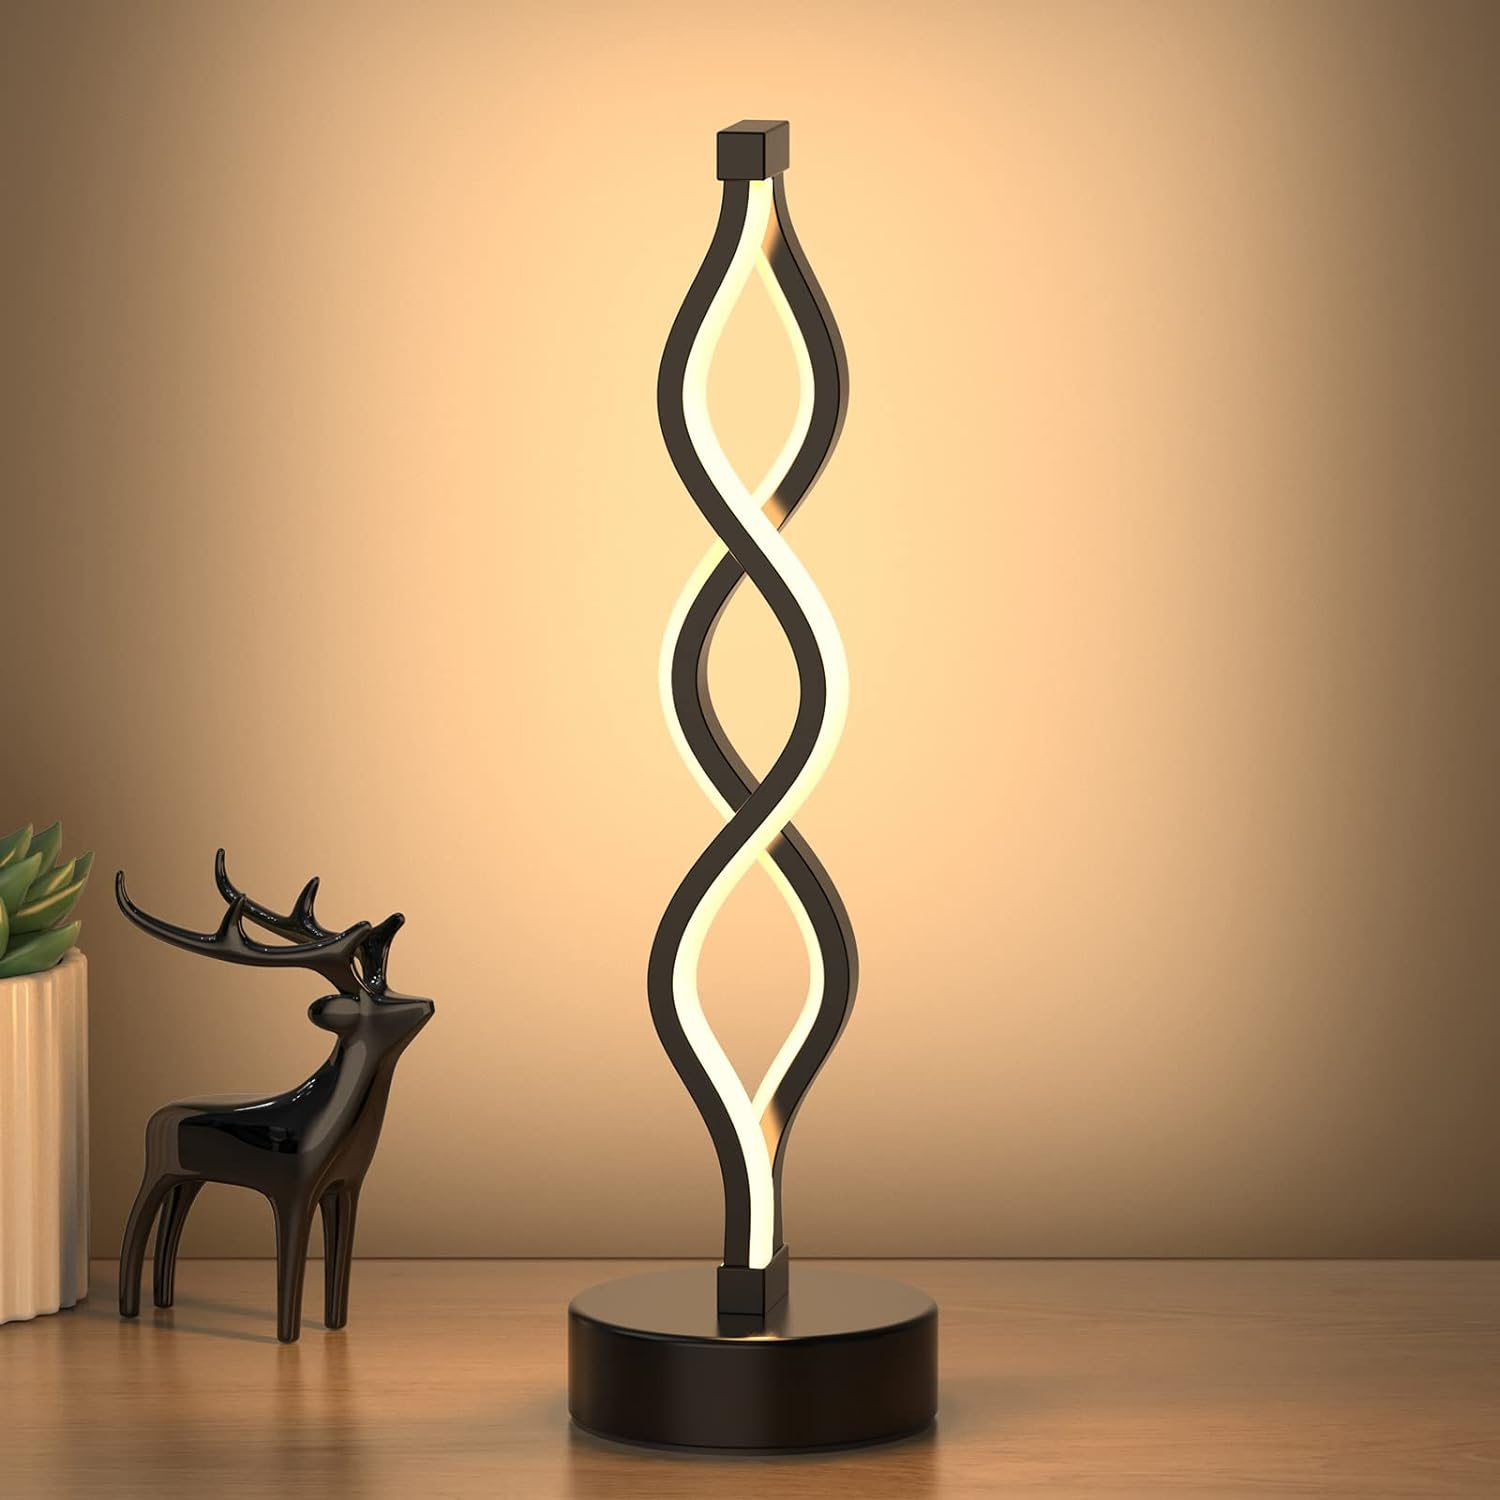 NUR Infinity Spiral LED Table Lamp Black, Dimmable Metallic Bedside Lamp with Touch Controller, 3 Colour Temperature, 15.8 Inch Height, Decorative Lamp for Home, Living Room